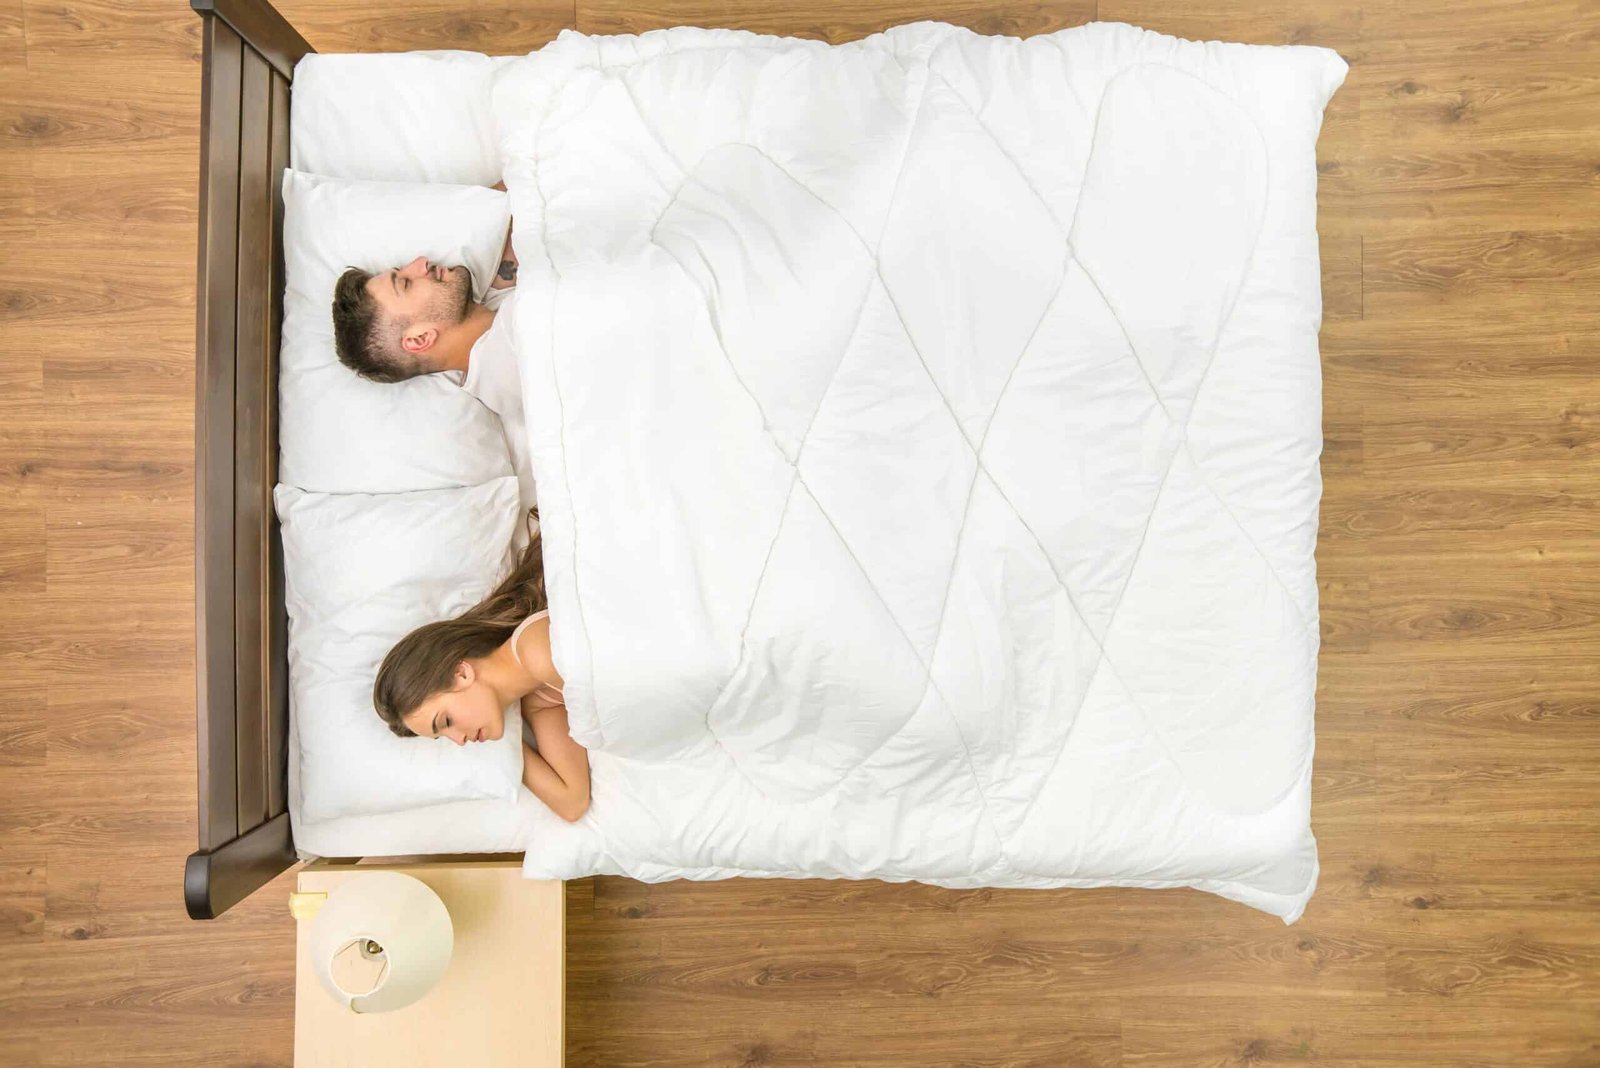 UK Mattress Sizes and Dimensions Explained